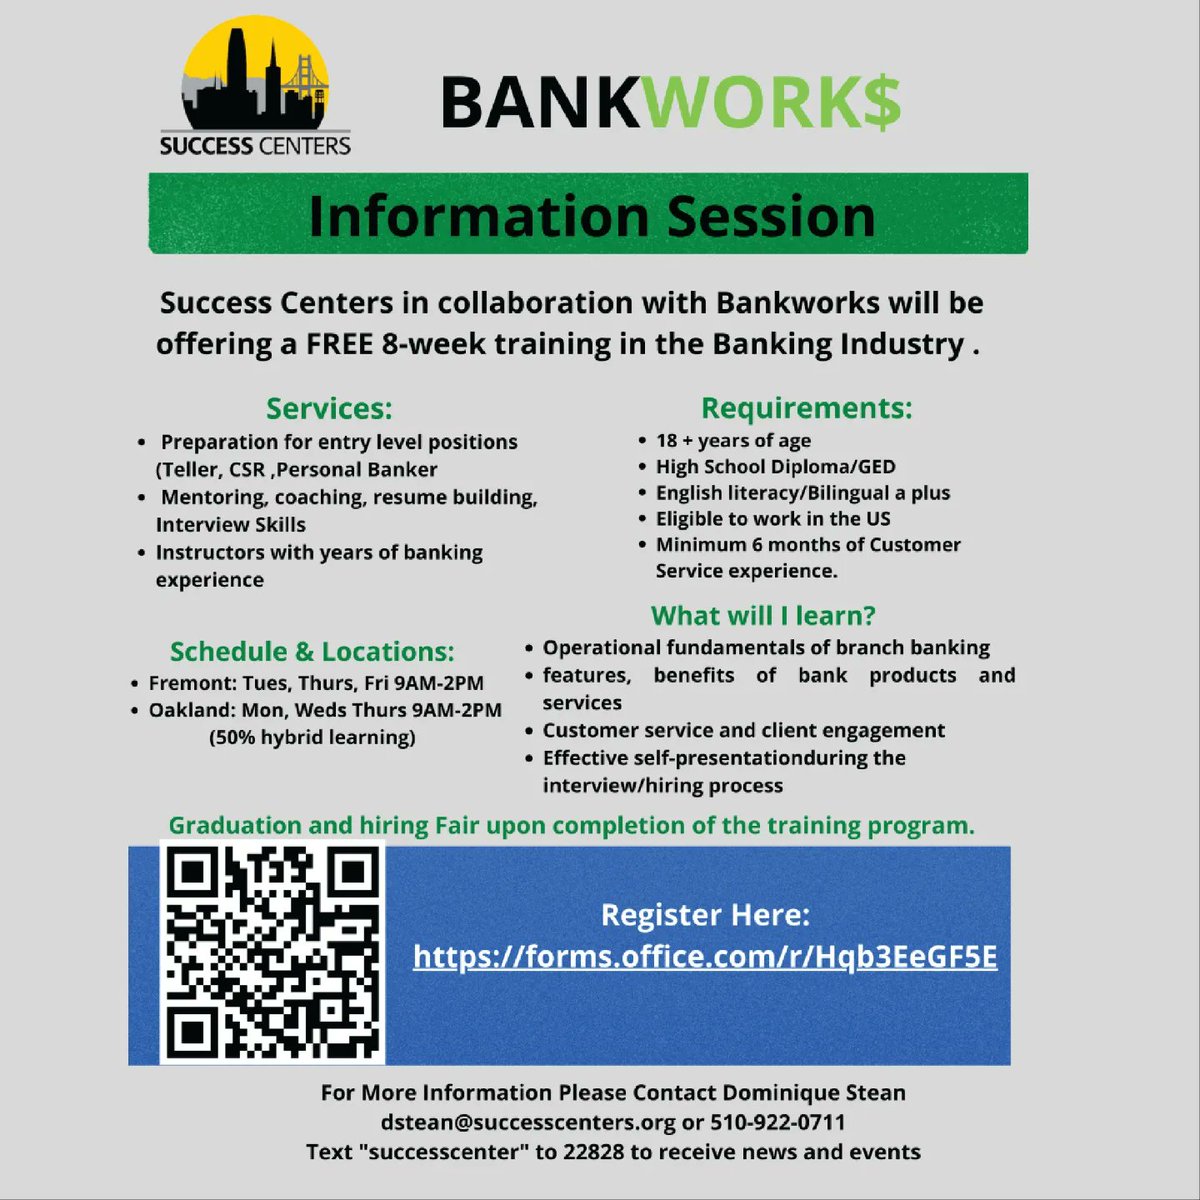 In Collaboration with BankWork$ Join our 8-Week training in the Banking Industry. Instructors have years of banking experience

Contact Dominique Stean: DStean@SuccessCenters.org / (510) 922-0711

#successcenters #fremont #oakland #bankworks #banking #jobs #employment